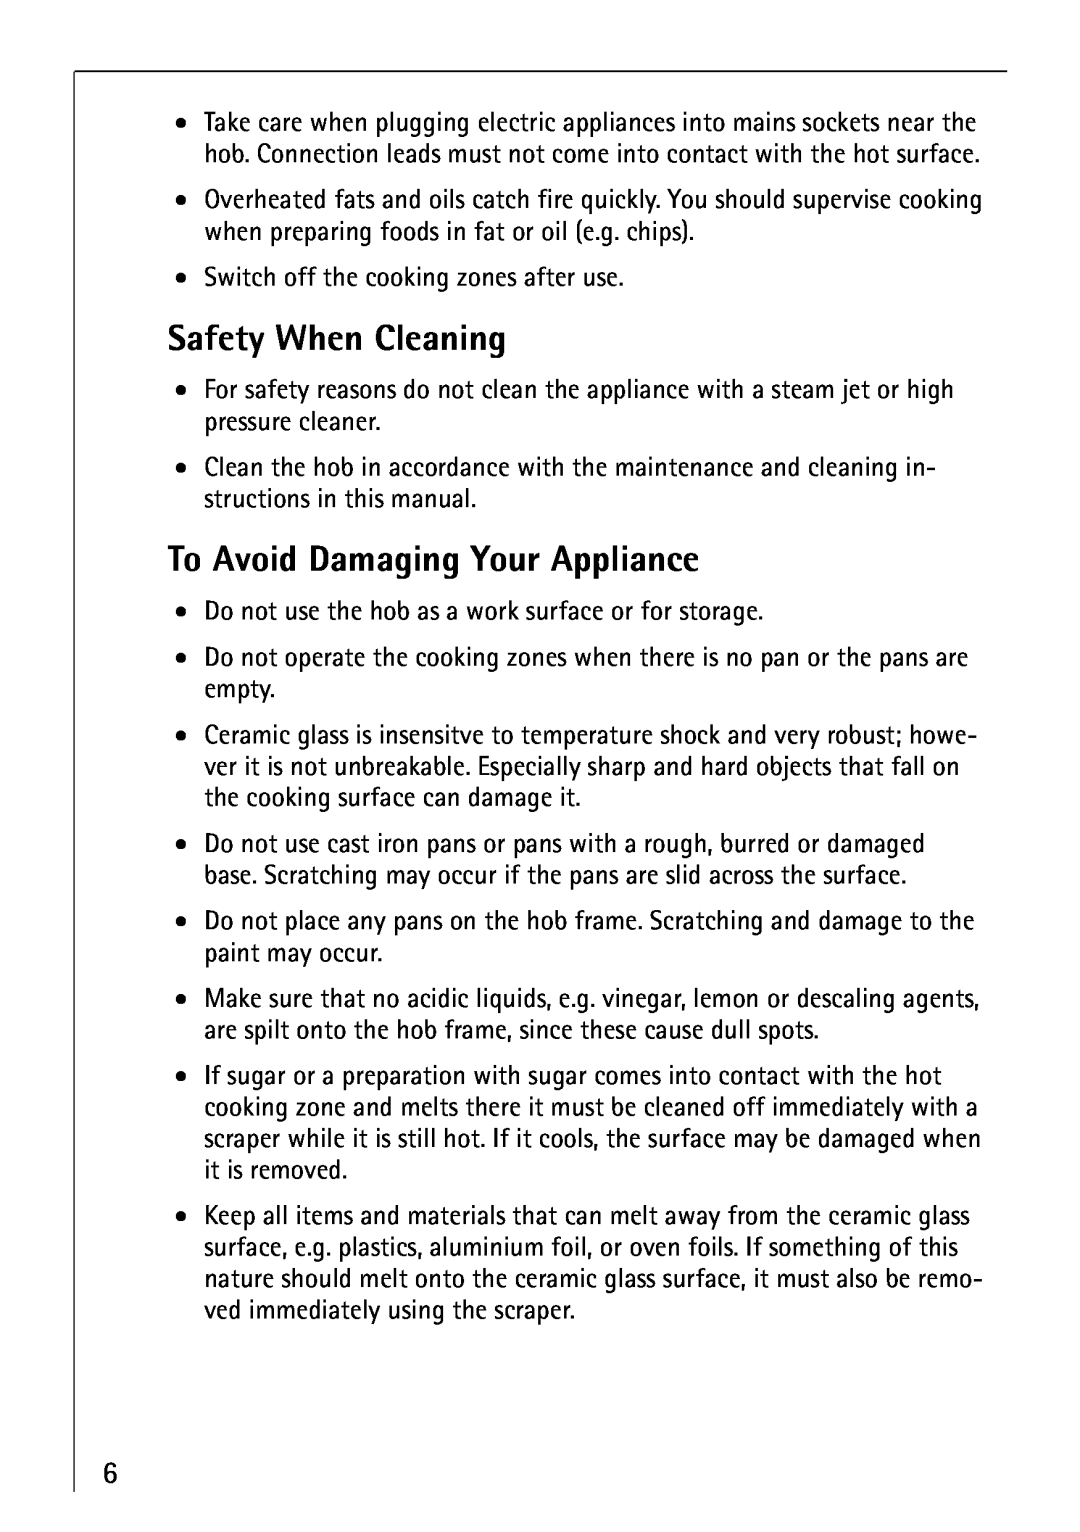 Electrolux 66300KF-an installation instructions Safety When Cleaning, To Avoid Damaging Your Appliance 